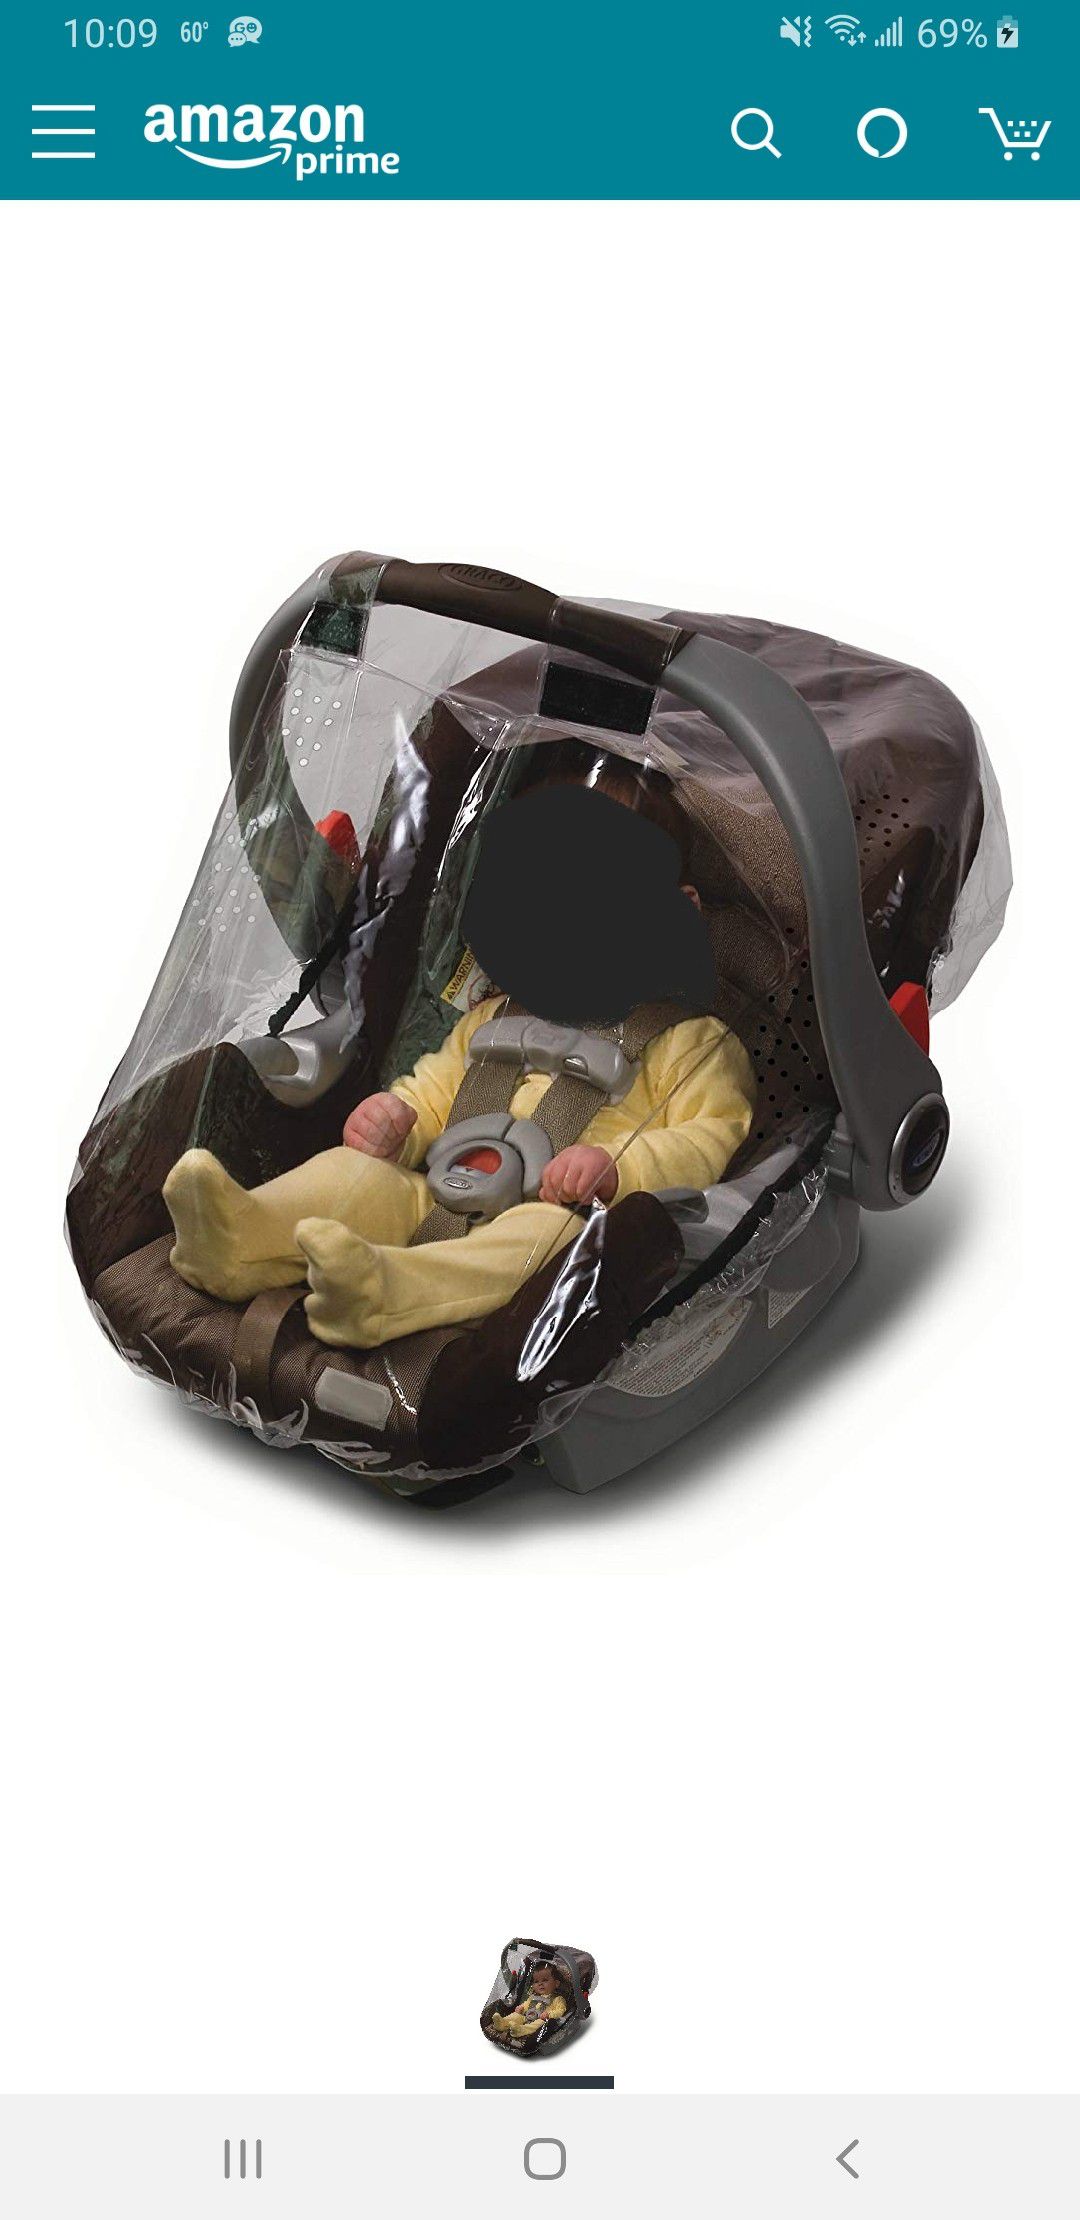 Weathershield for Infant Car Seat